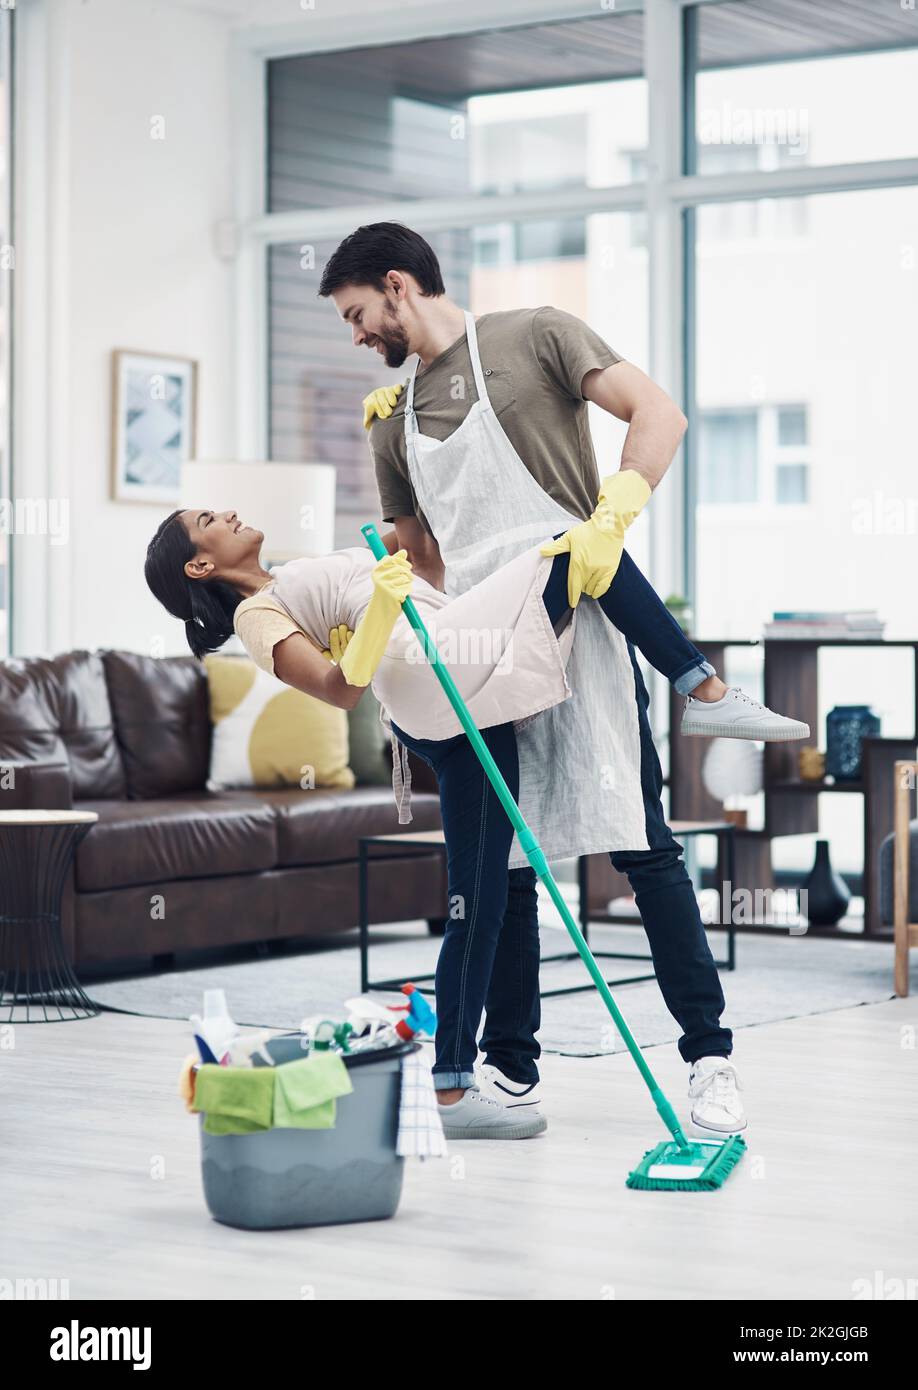 Romance changes everything. Shot of a happy young couple dancing while mopping the floor at home. Stock Photo